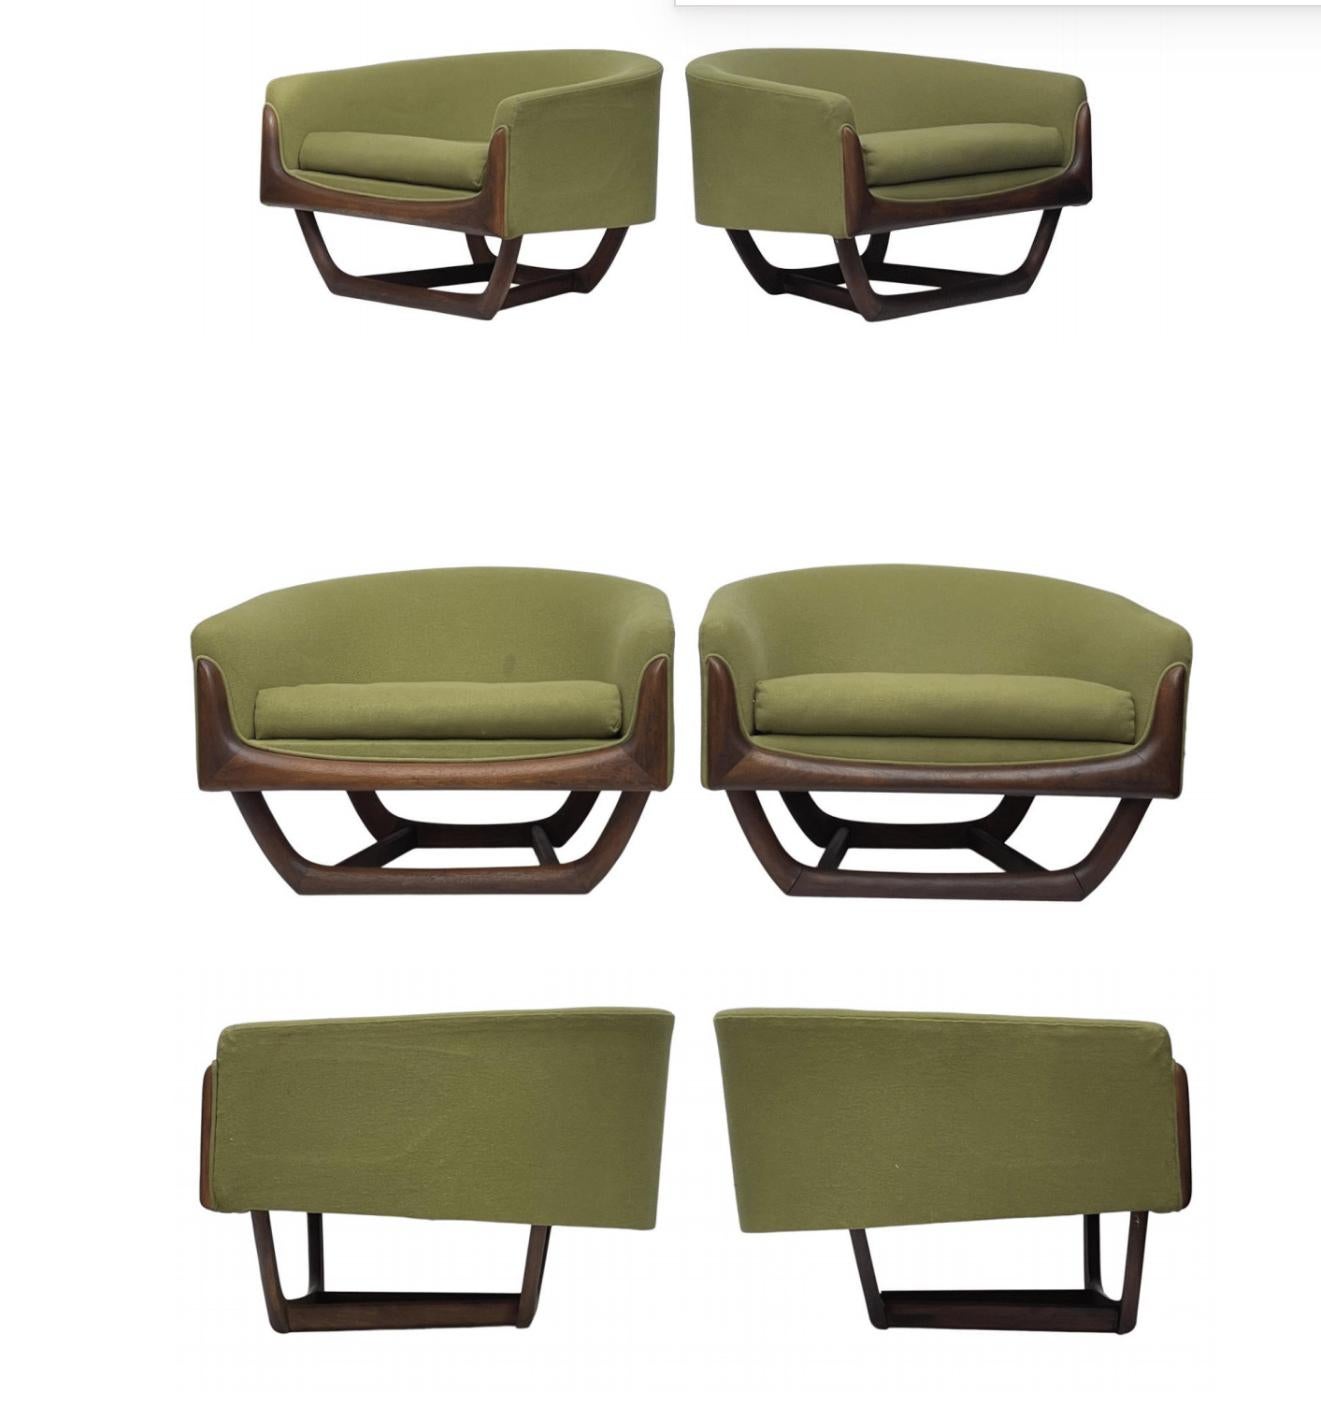 Upholstery 1960s Adrian Pearsall Craft Associates 2832-C Lounge Chair A Pair For Sale